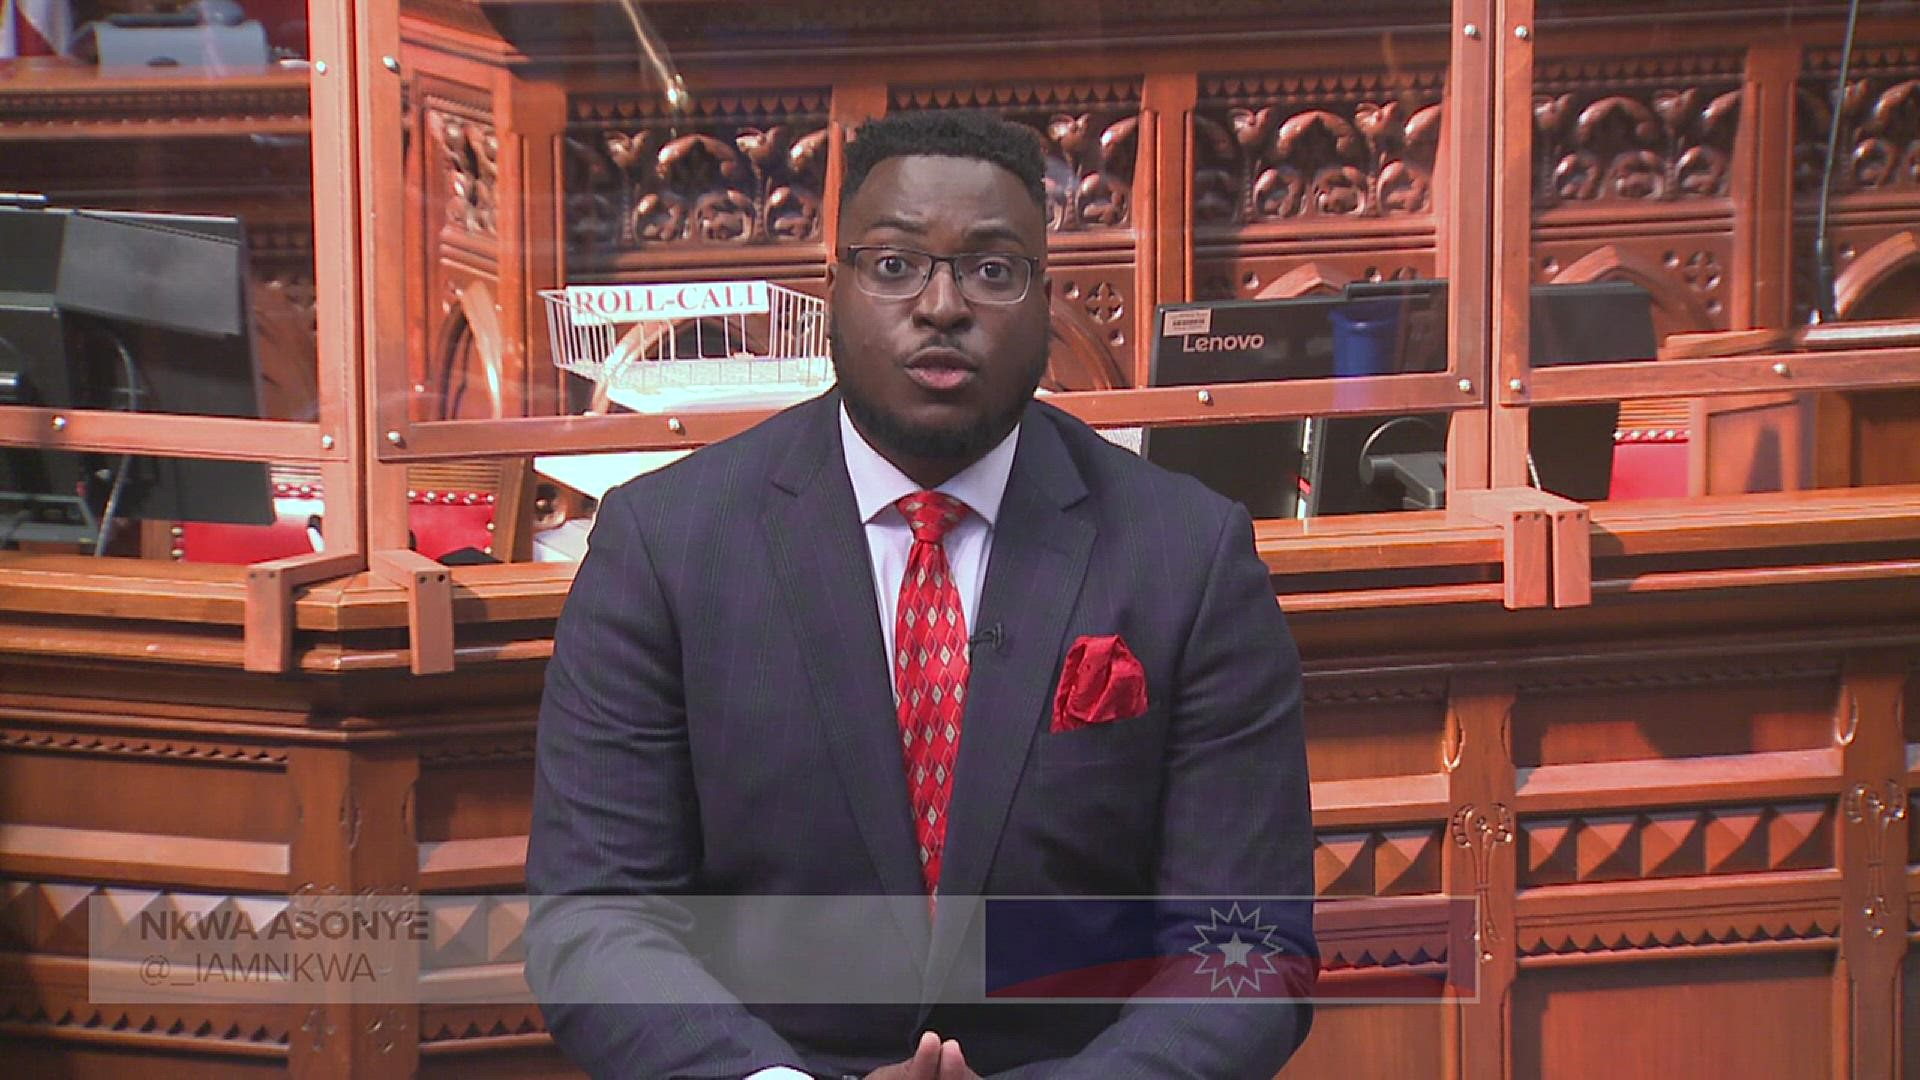 Connecticut state representatives reflect on the significance of Juneteenth as the state marks the first celebration as a state and federal holiday.